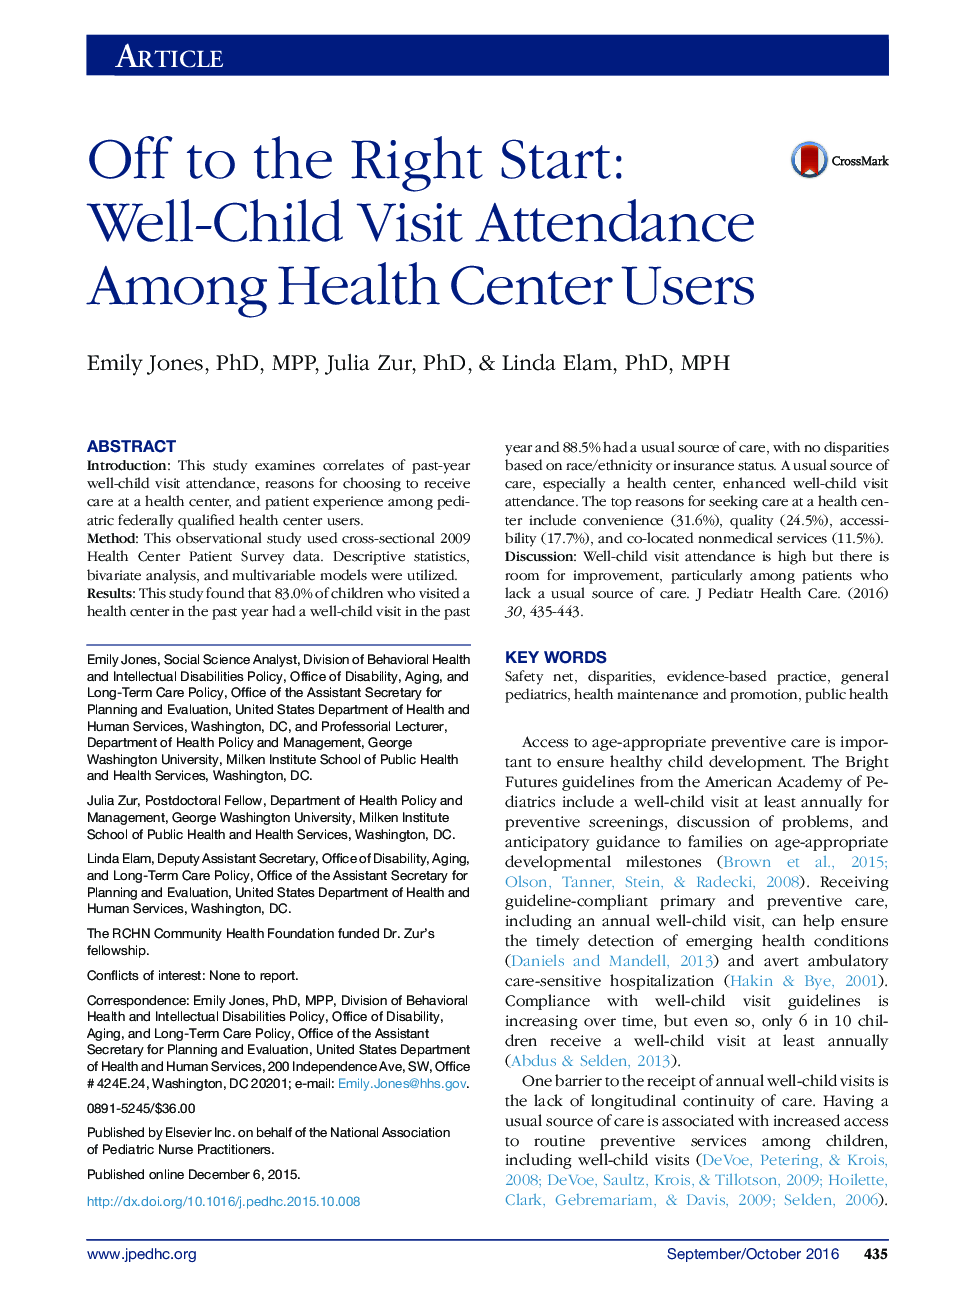 Off to the Right Start: Well-Child Visit Attendance Among Health Center Users 